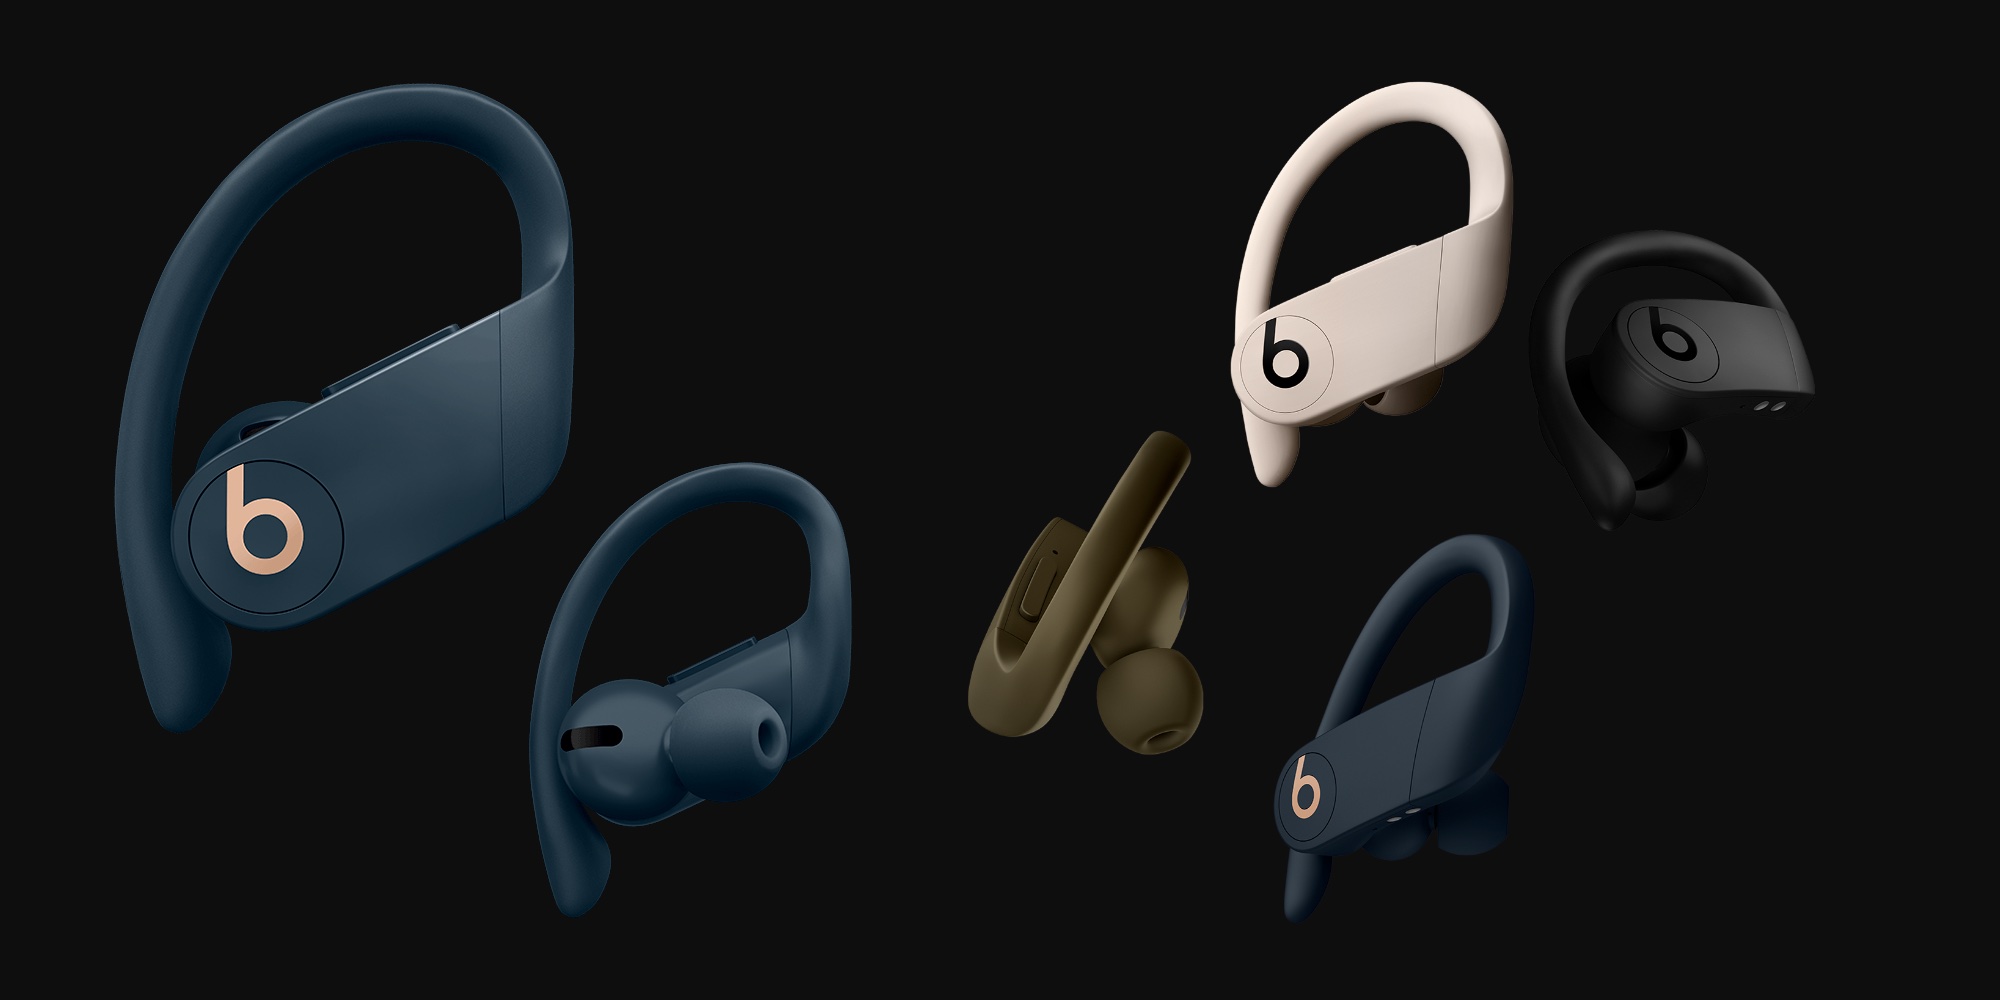 Apple Powerbeats Pro are priced from 